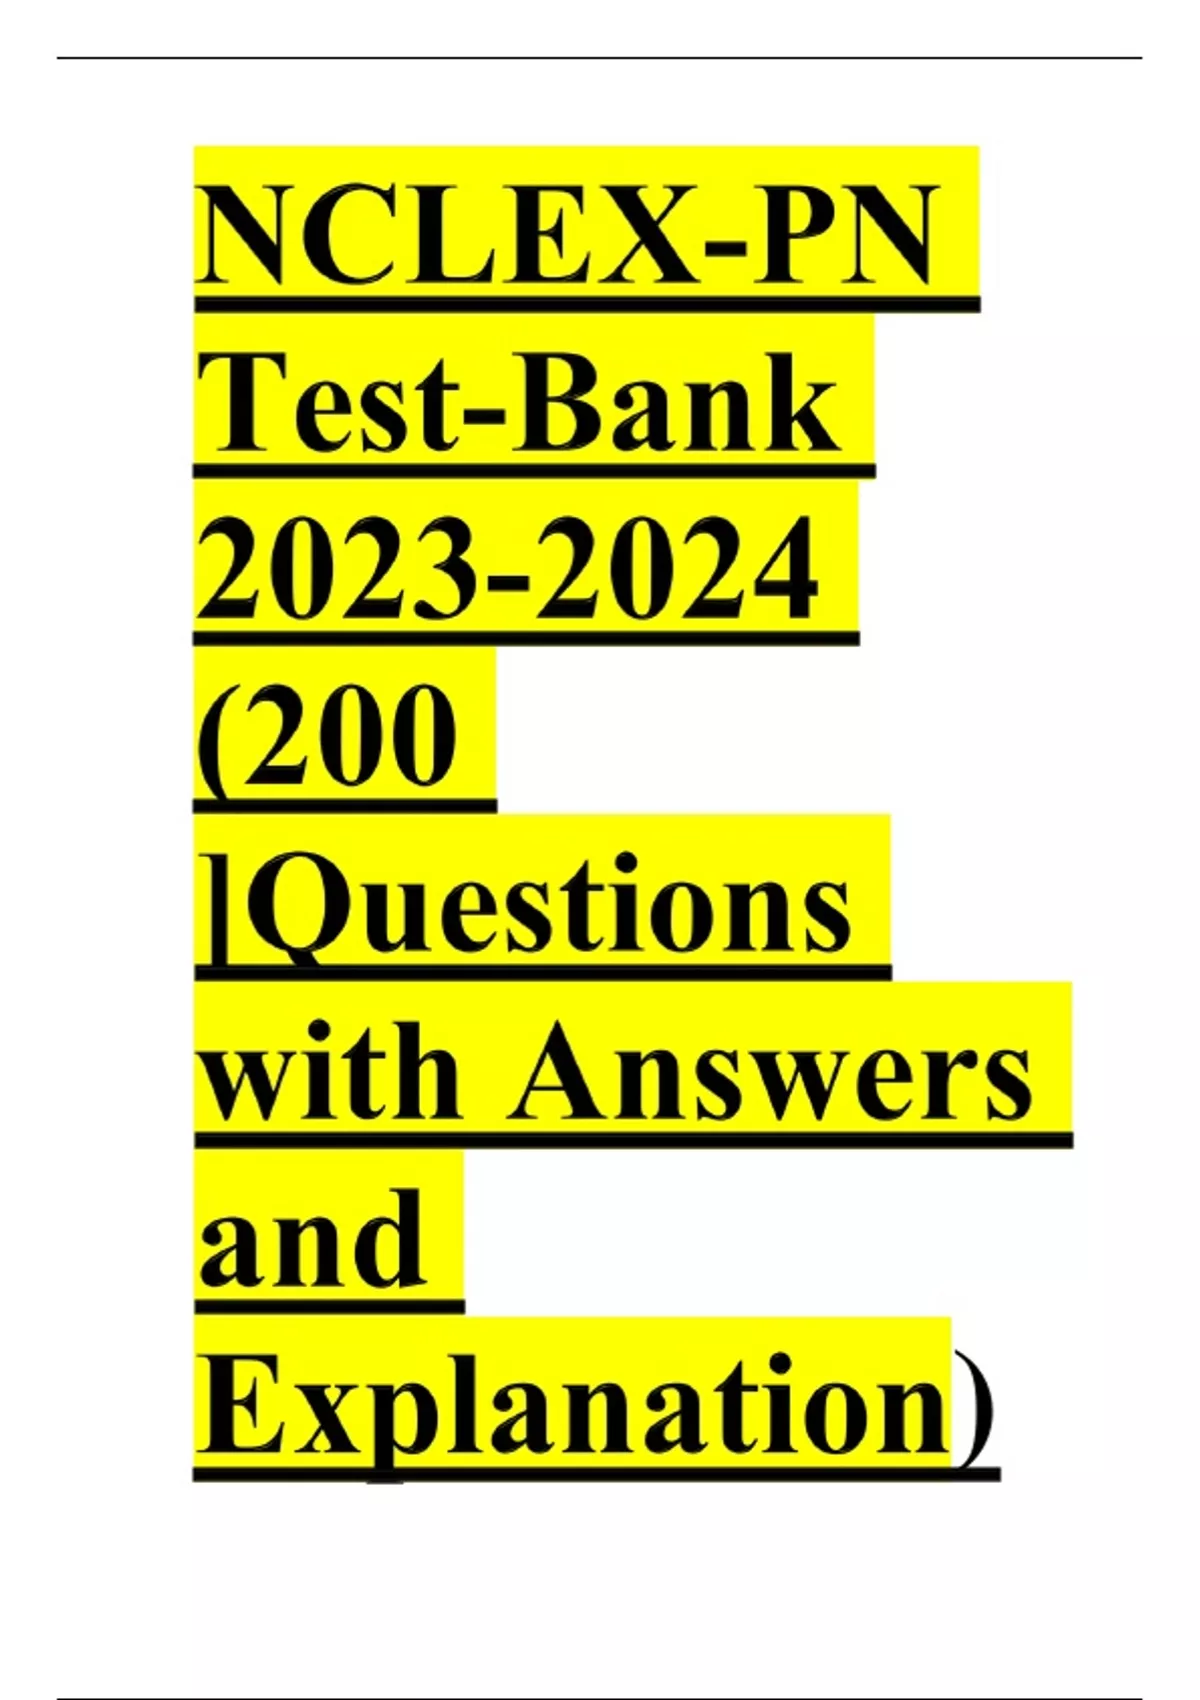 NCLEXPN TestBank (200 ]Questions with Answers and Explanation NCLEX